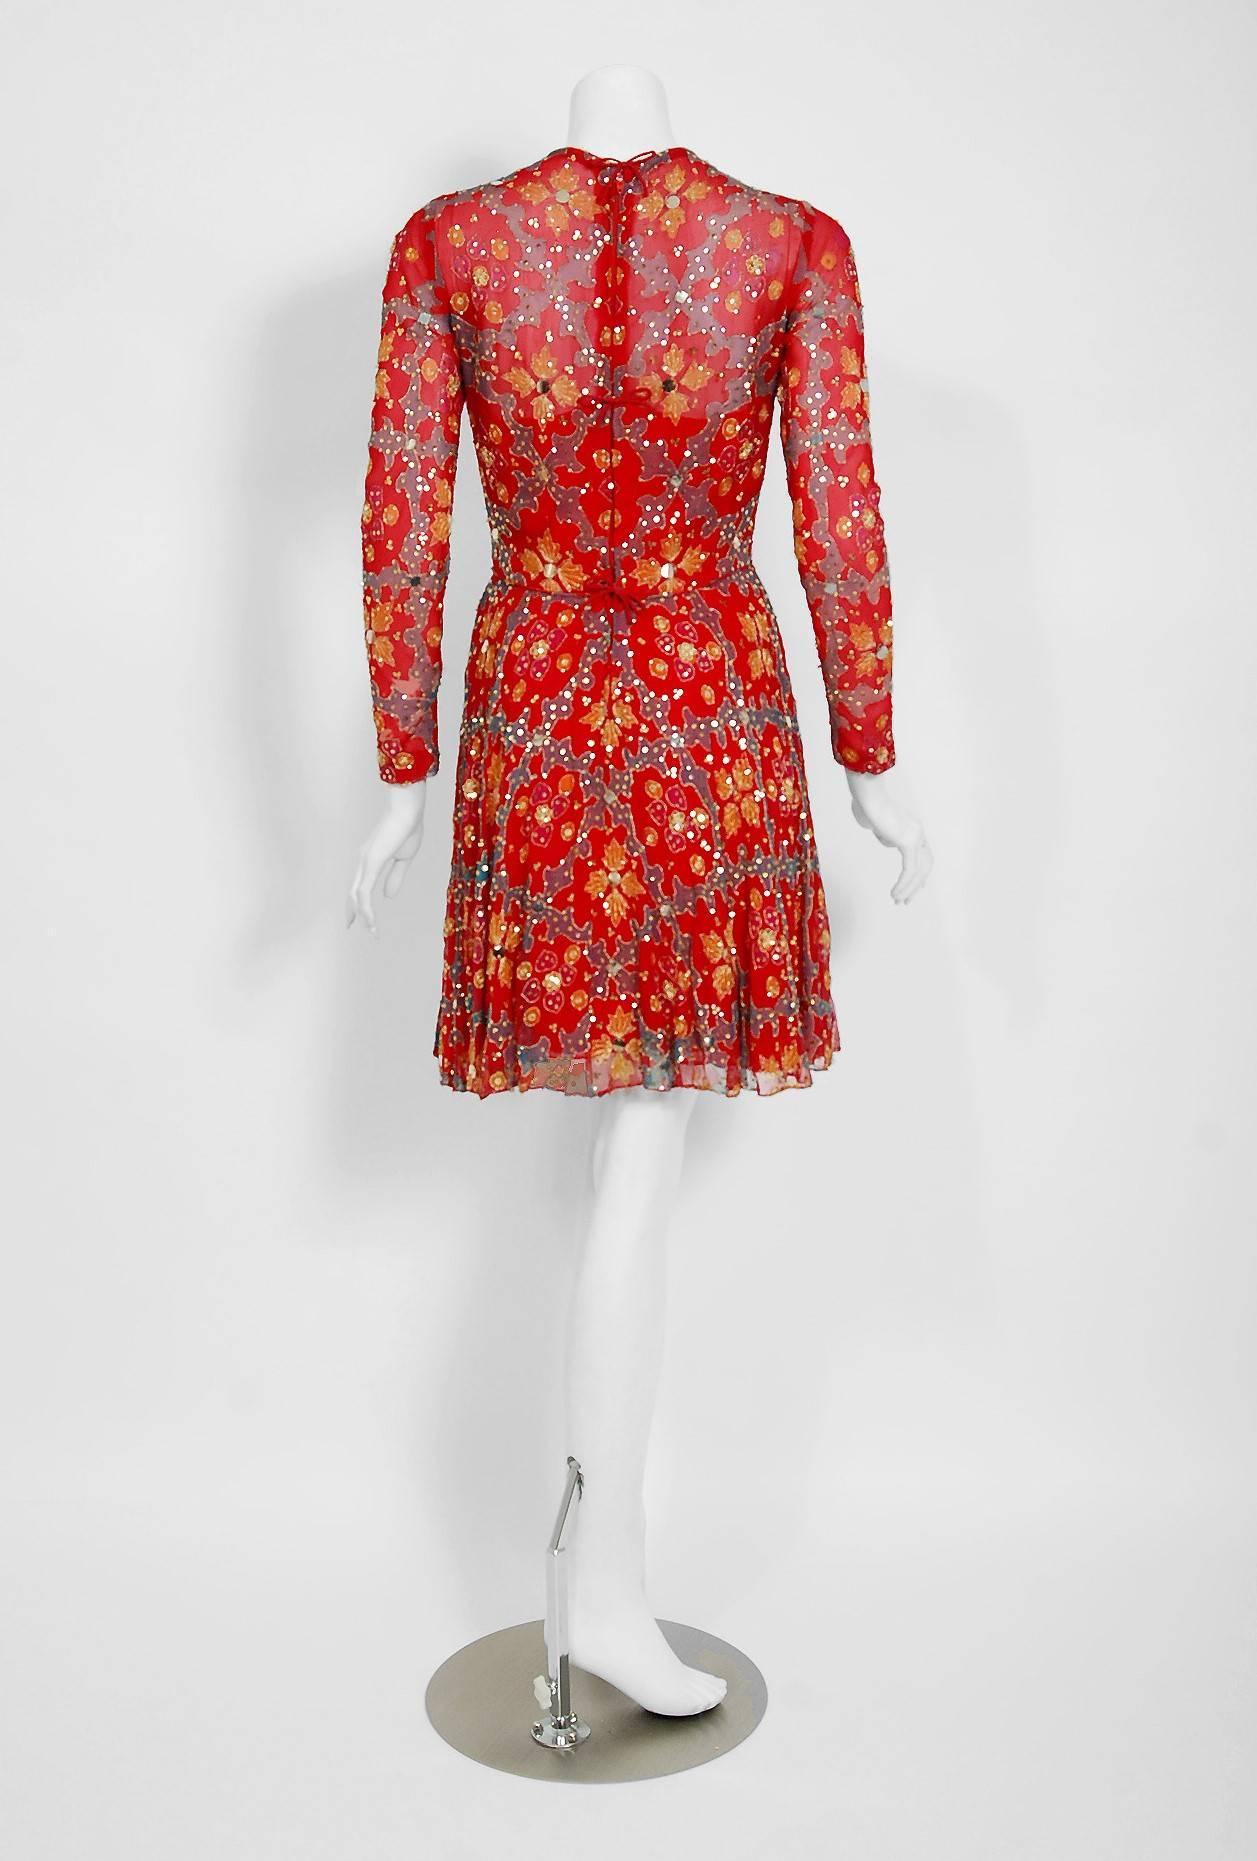 1968 Arnold Scaasi Couture Red Embroidered Sequin Indian Silk Long-Sleeve Dress 1